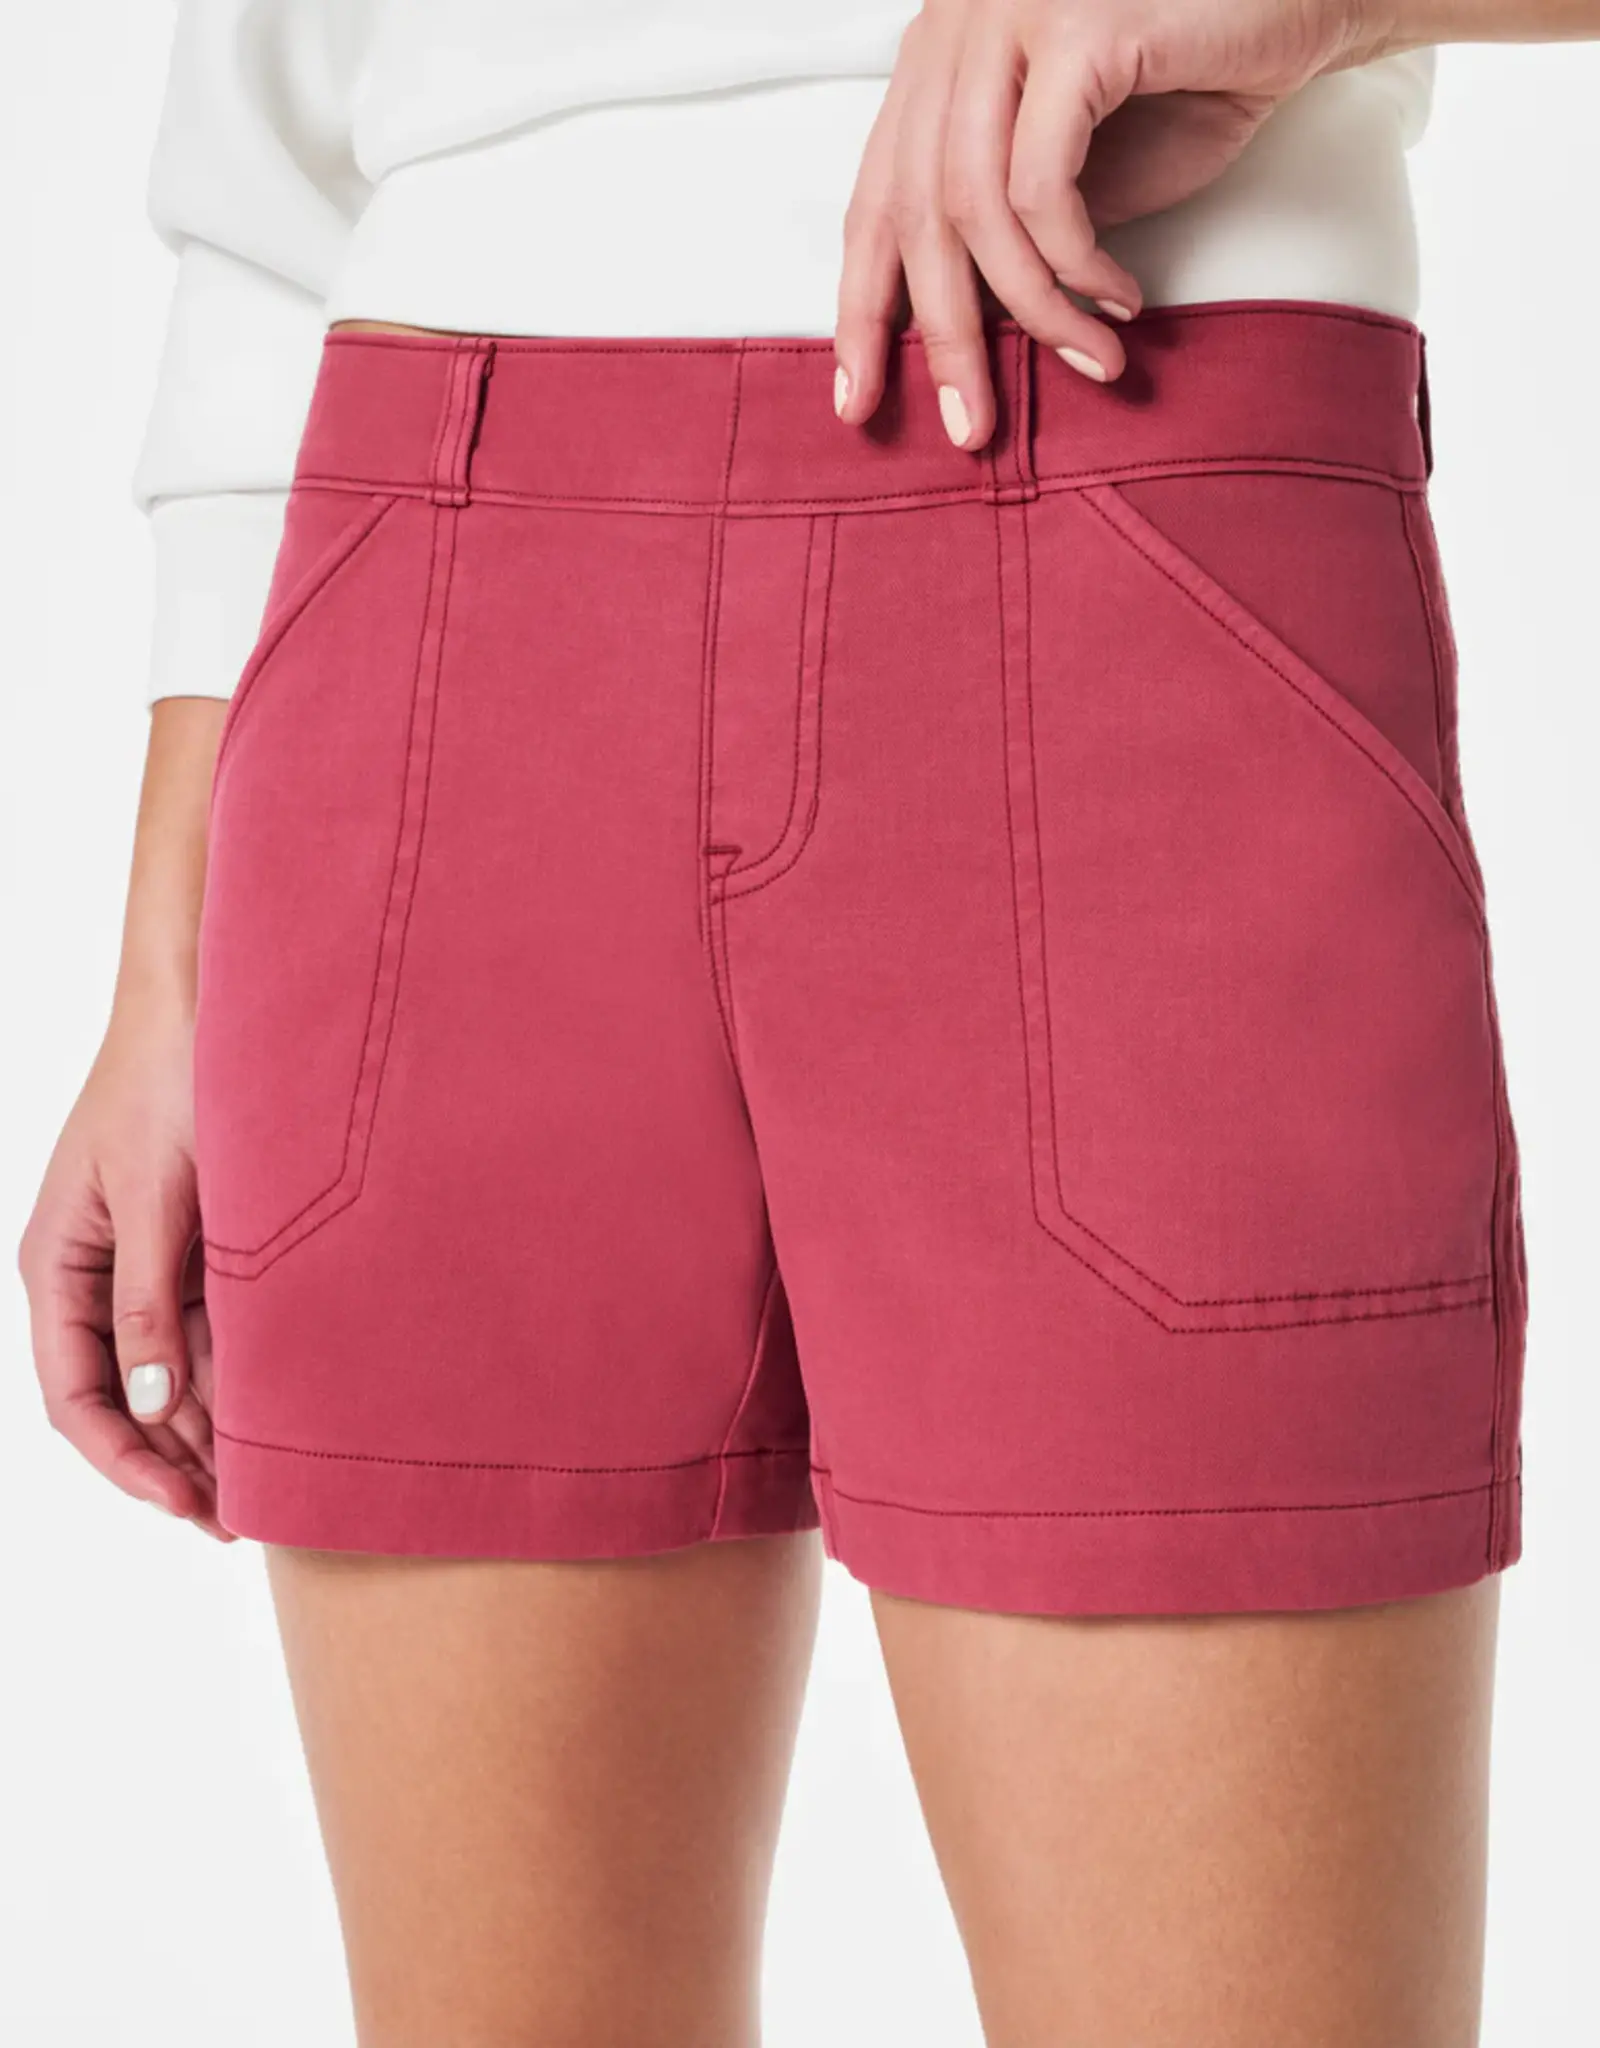 Olive Oil Twill Short Spanx – Pink & Navy Boutique